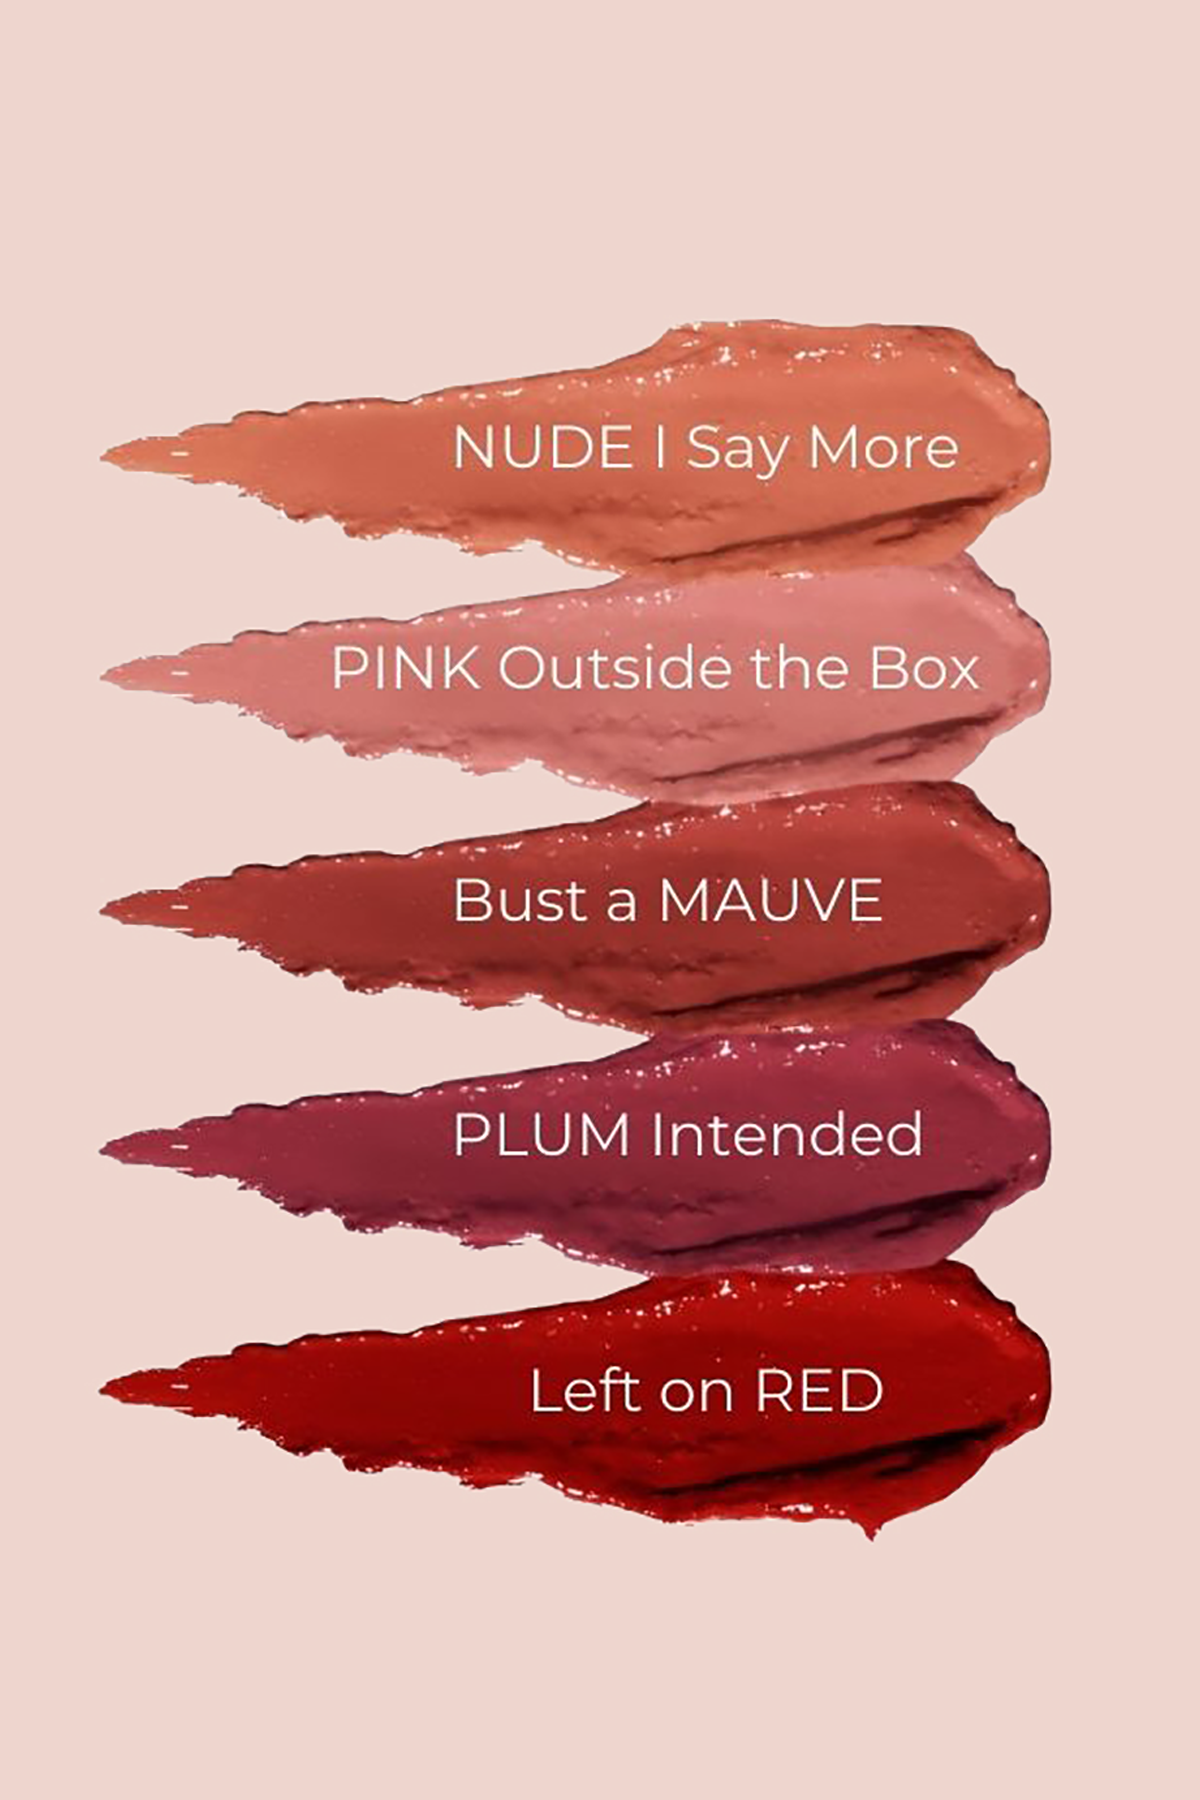 Lipstick shades Long-lasting Matte lipstick Moisturizing  Waterproof  Hydrating Red lipstick Nude lipstick Lipstick trends color guide application tips Lipstick for different skin tones Lip gloss  Lip pencil Mauve Red Nude Pink Plum